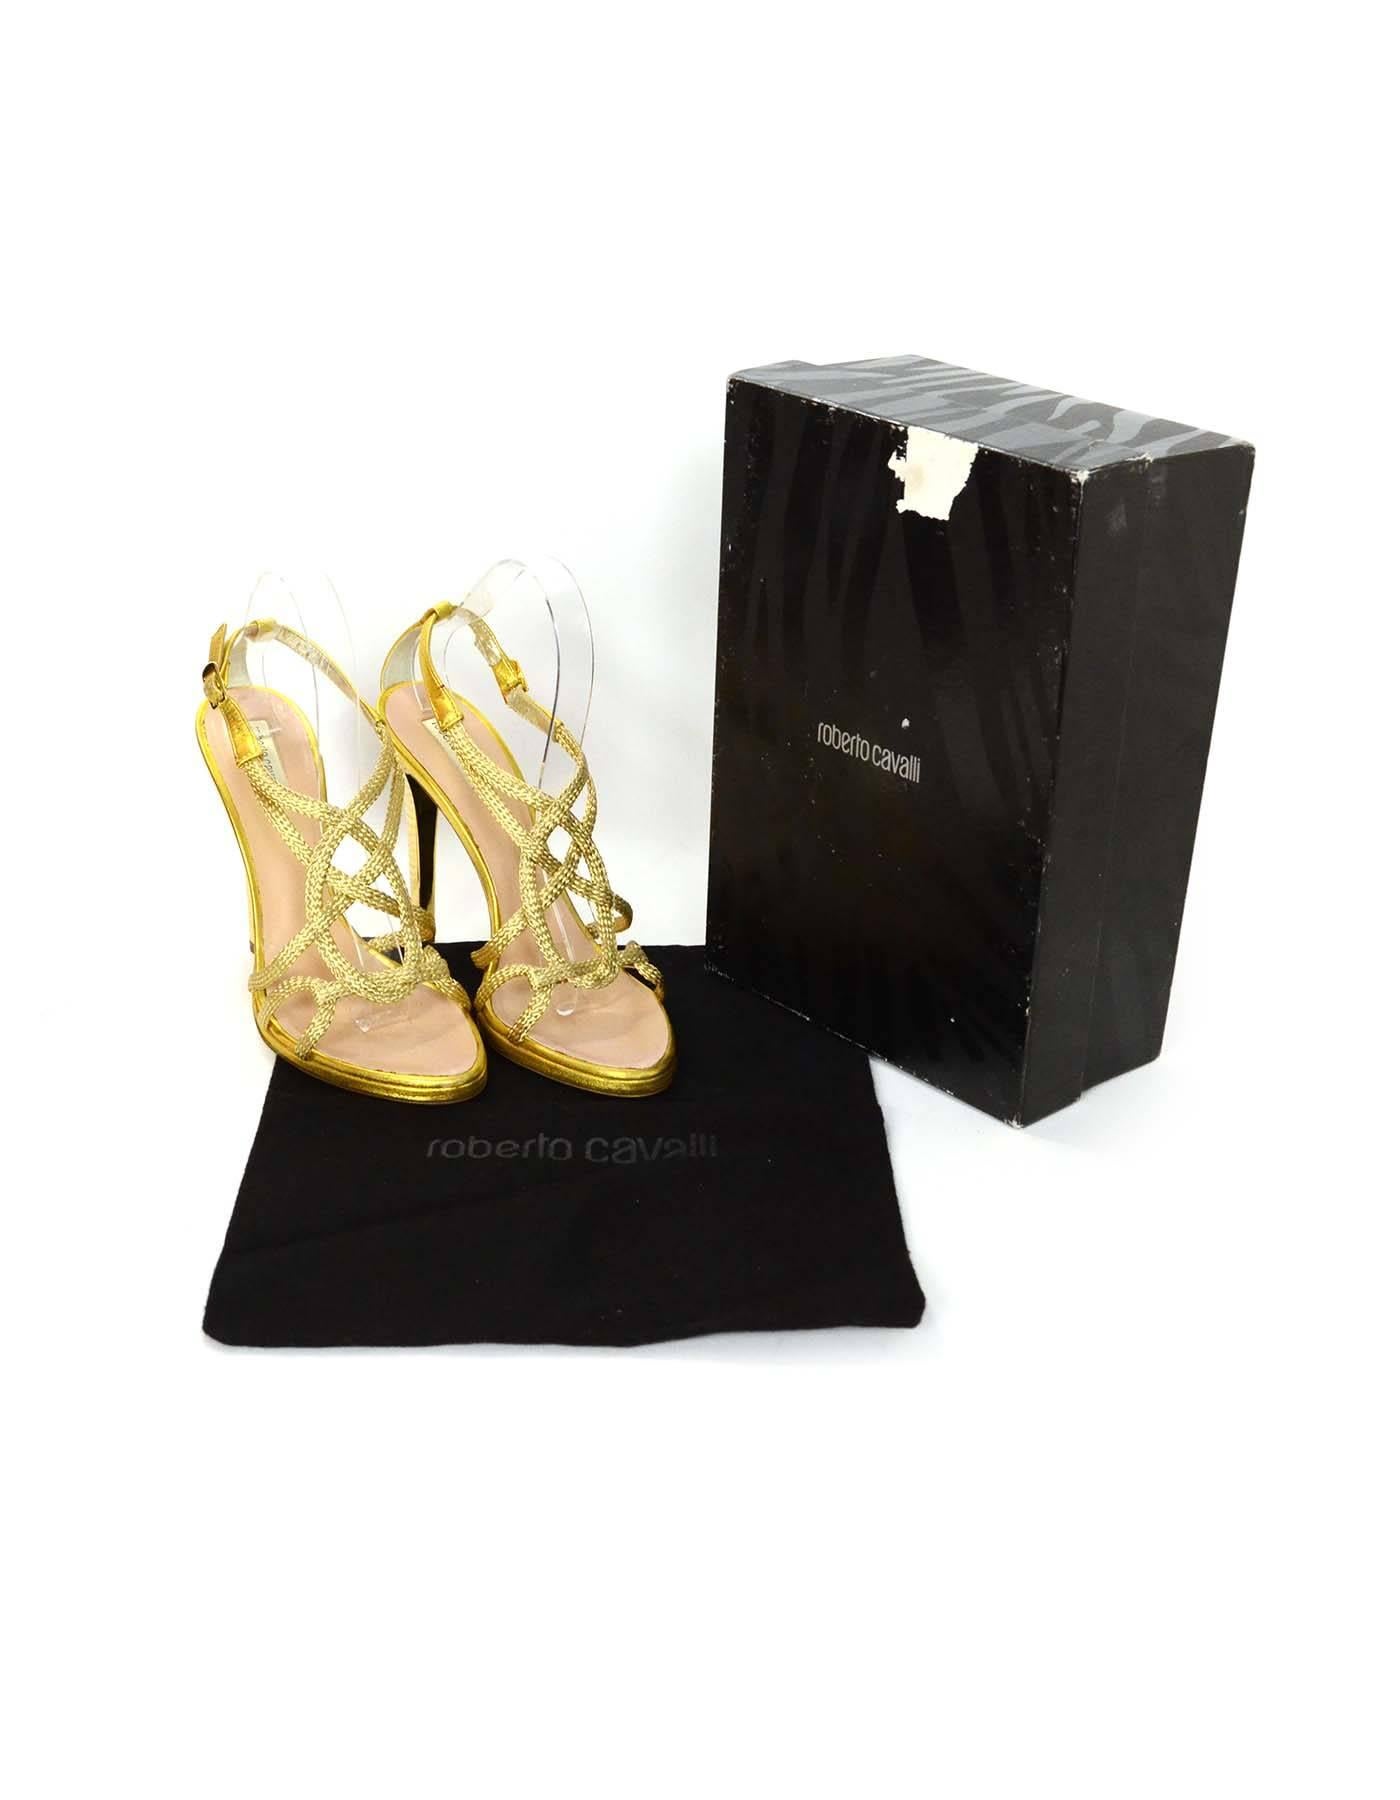 Roberto Cavalli Gold Sandals Sz 39.5 with Dust Bag and Box 4